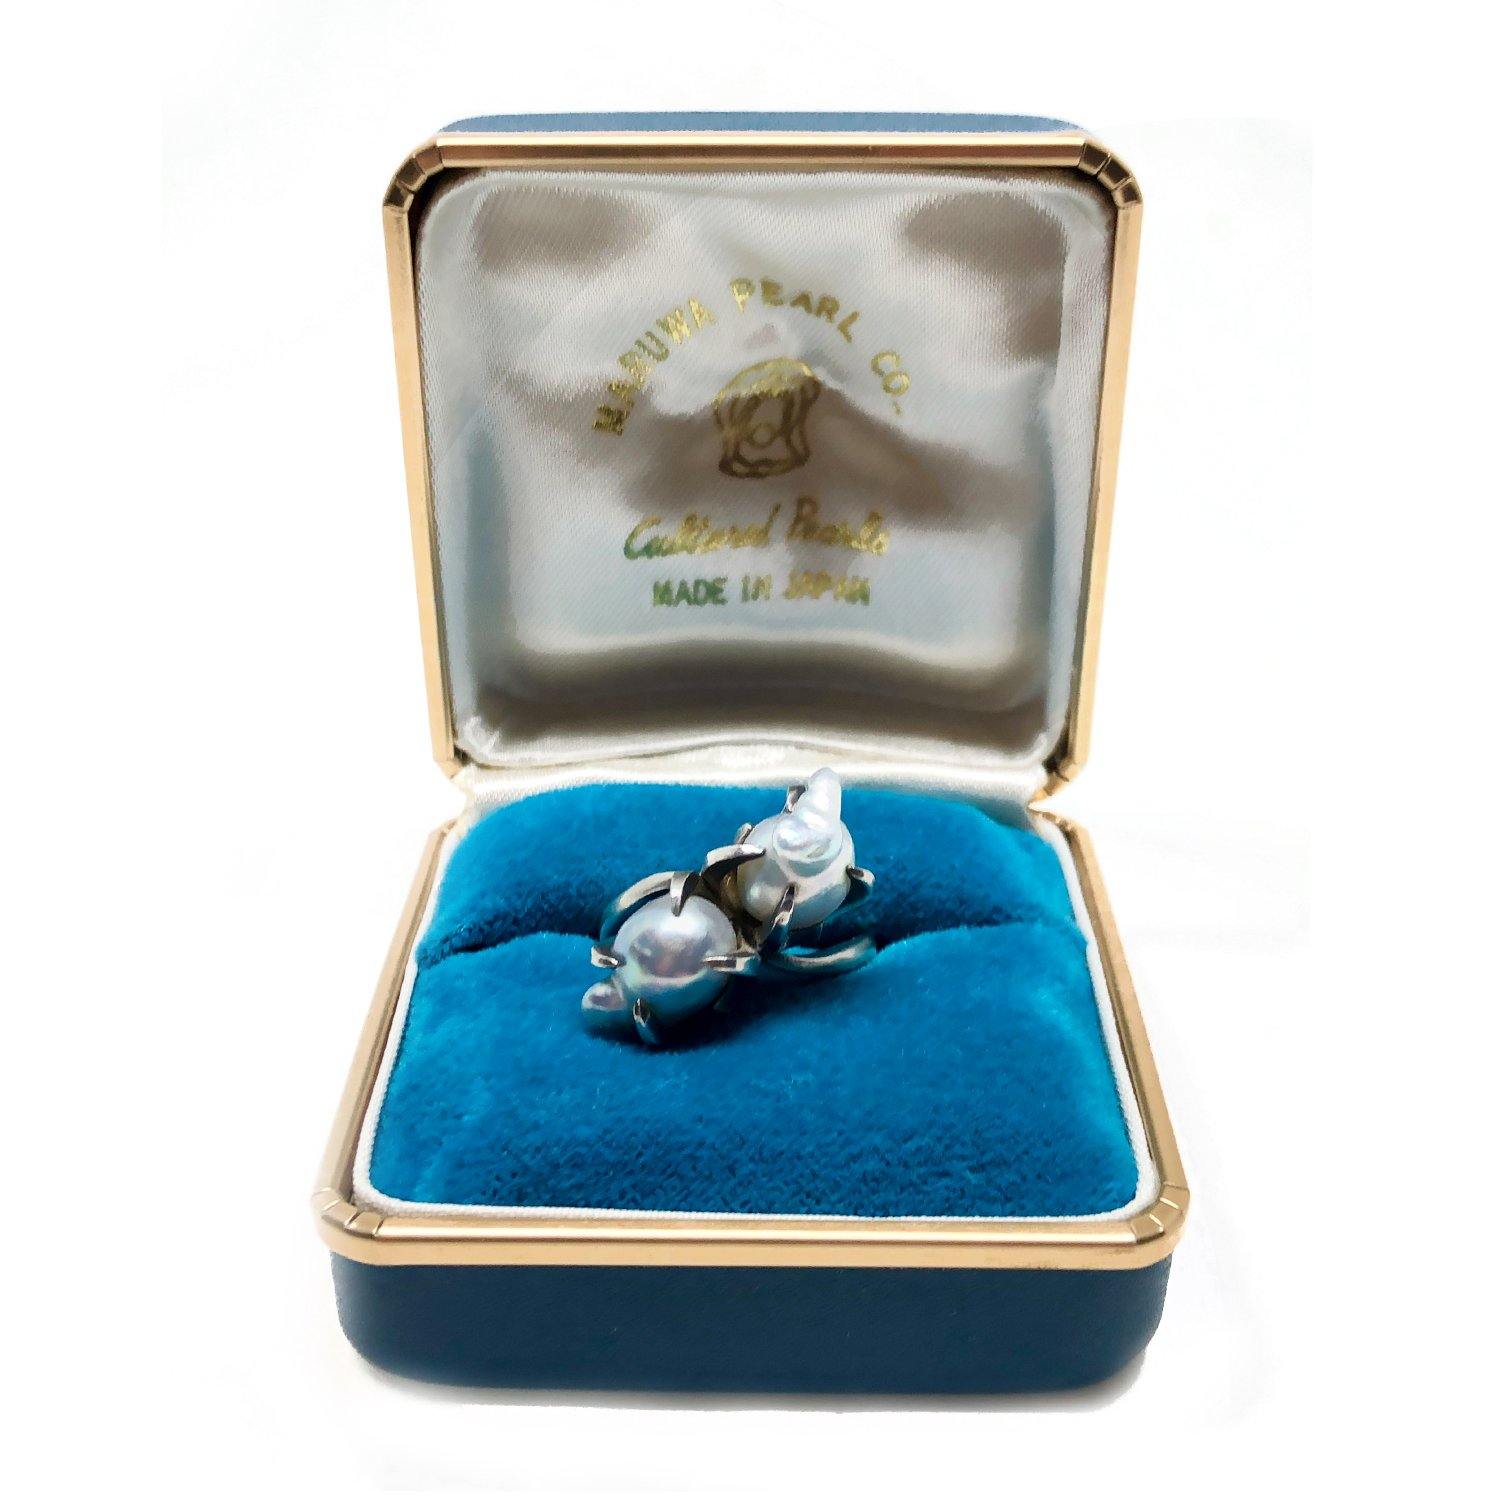 Box Maruwa Gothic Japanese Saltwater Blue Akoya Cultured Pearl Ring- Sterling Silver Sz 6